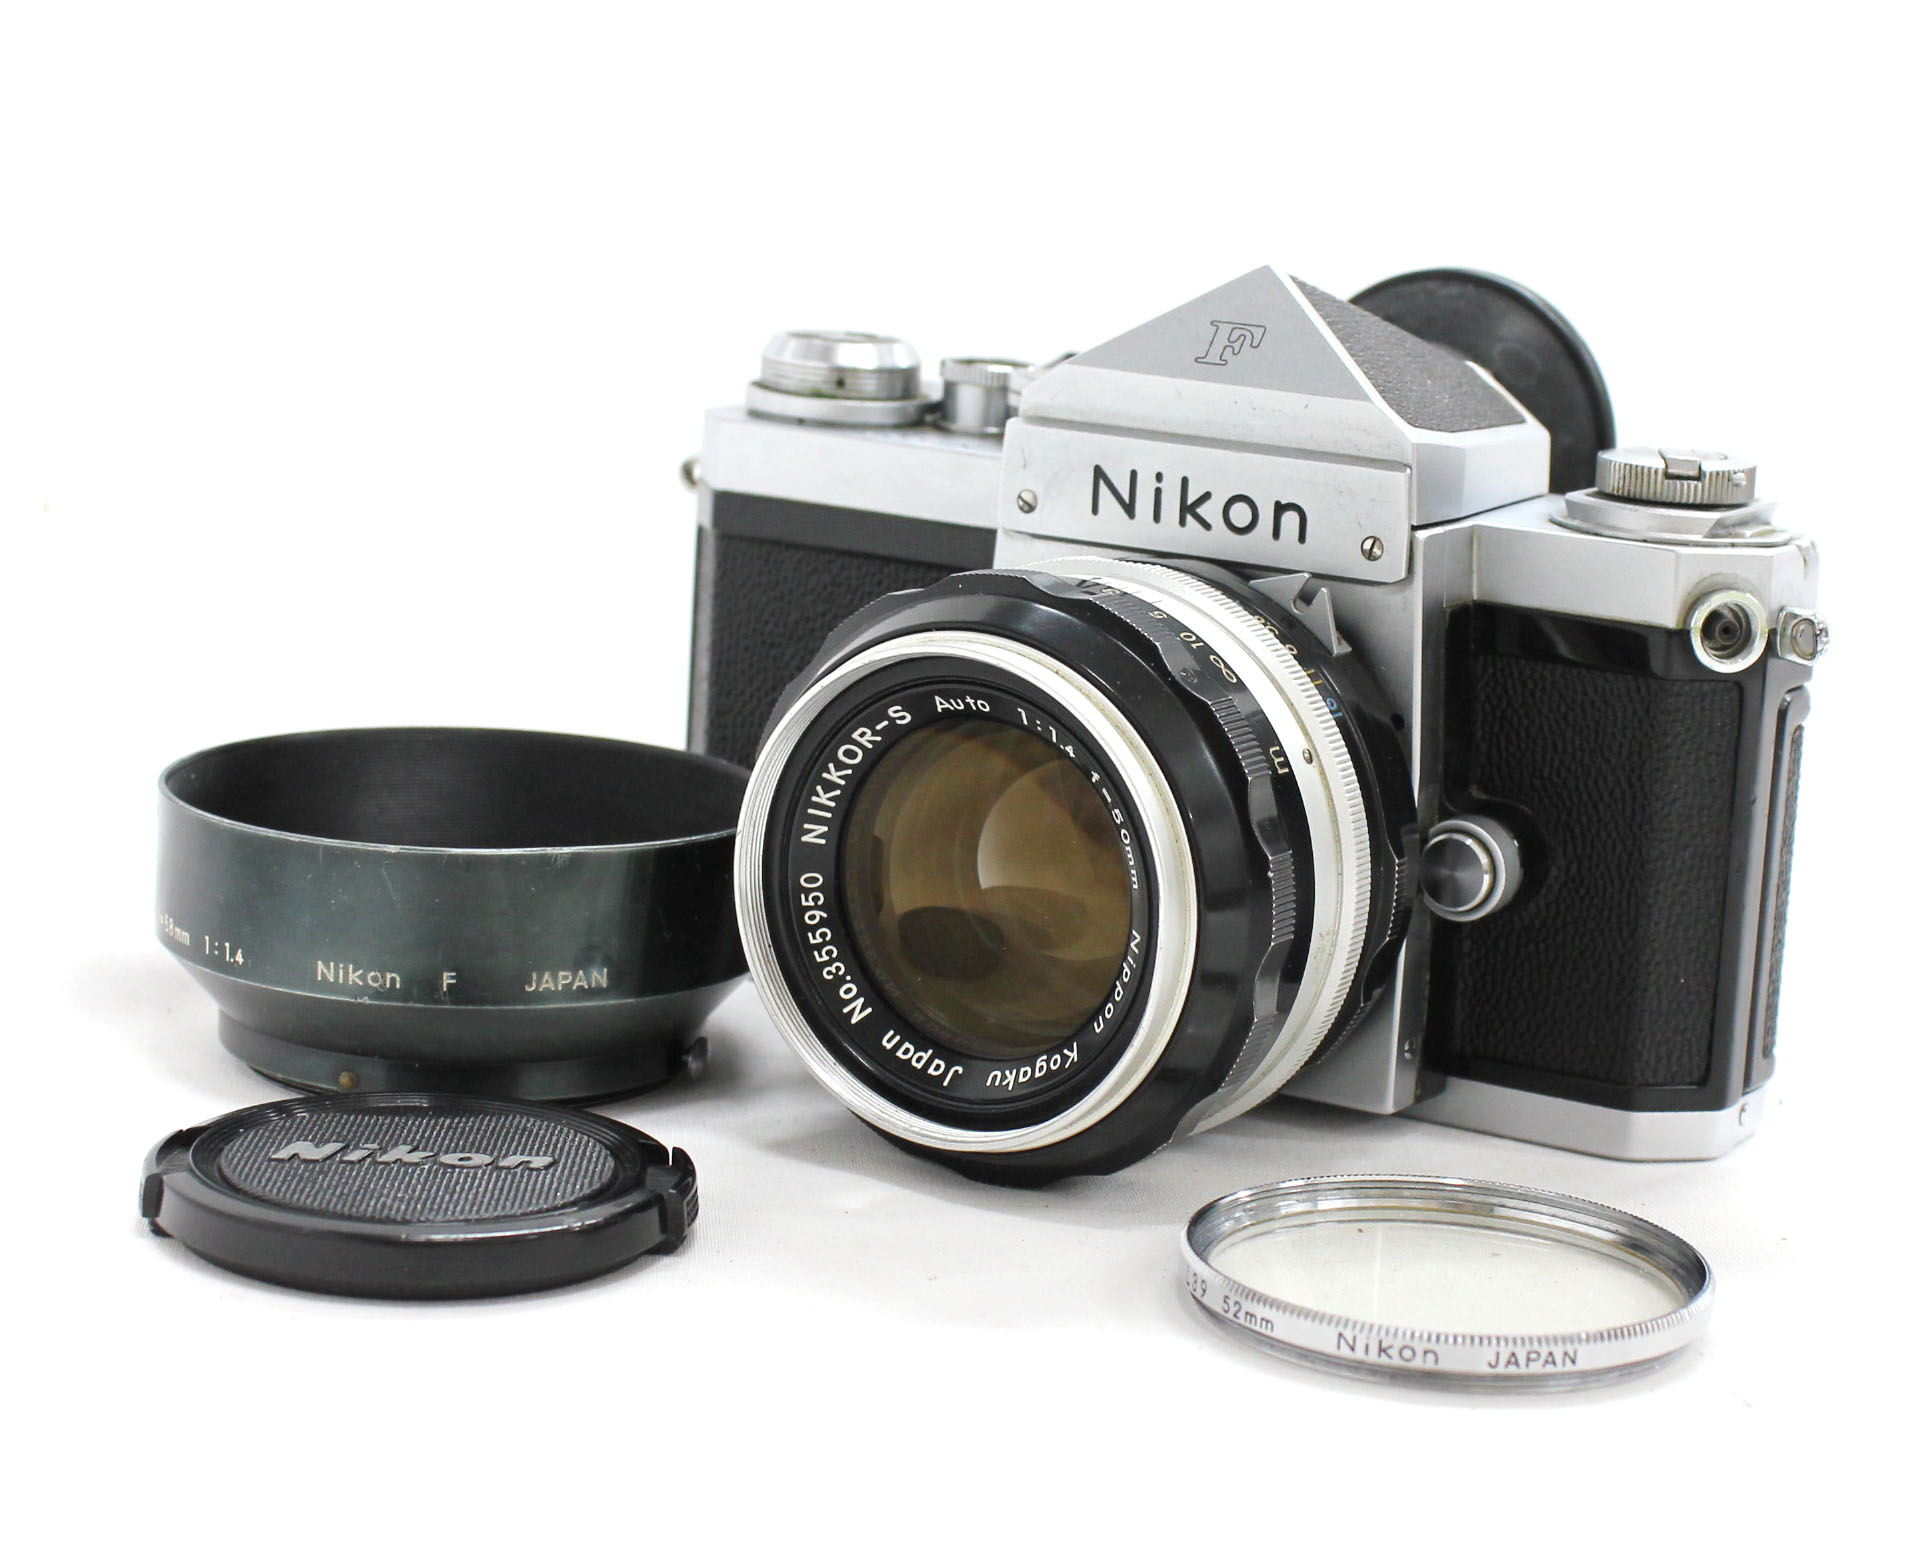 Nikon Apollo New F Eye Level 35mm SLR Film Camera S/N 742* with Nikkor-S 50mm F/1.4 Lens from Japan